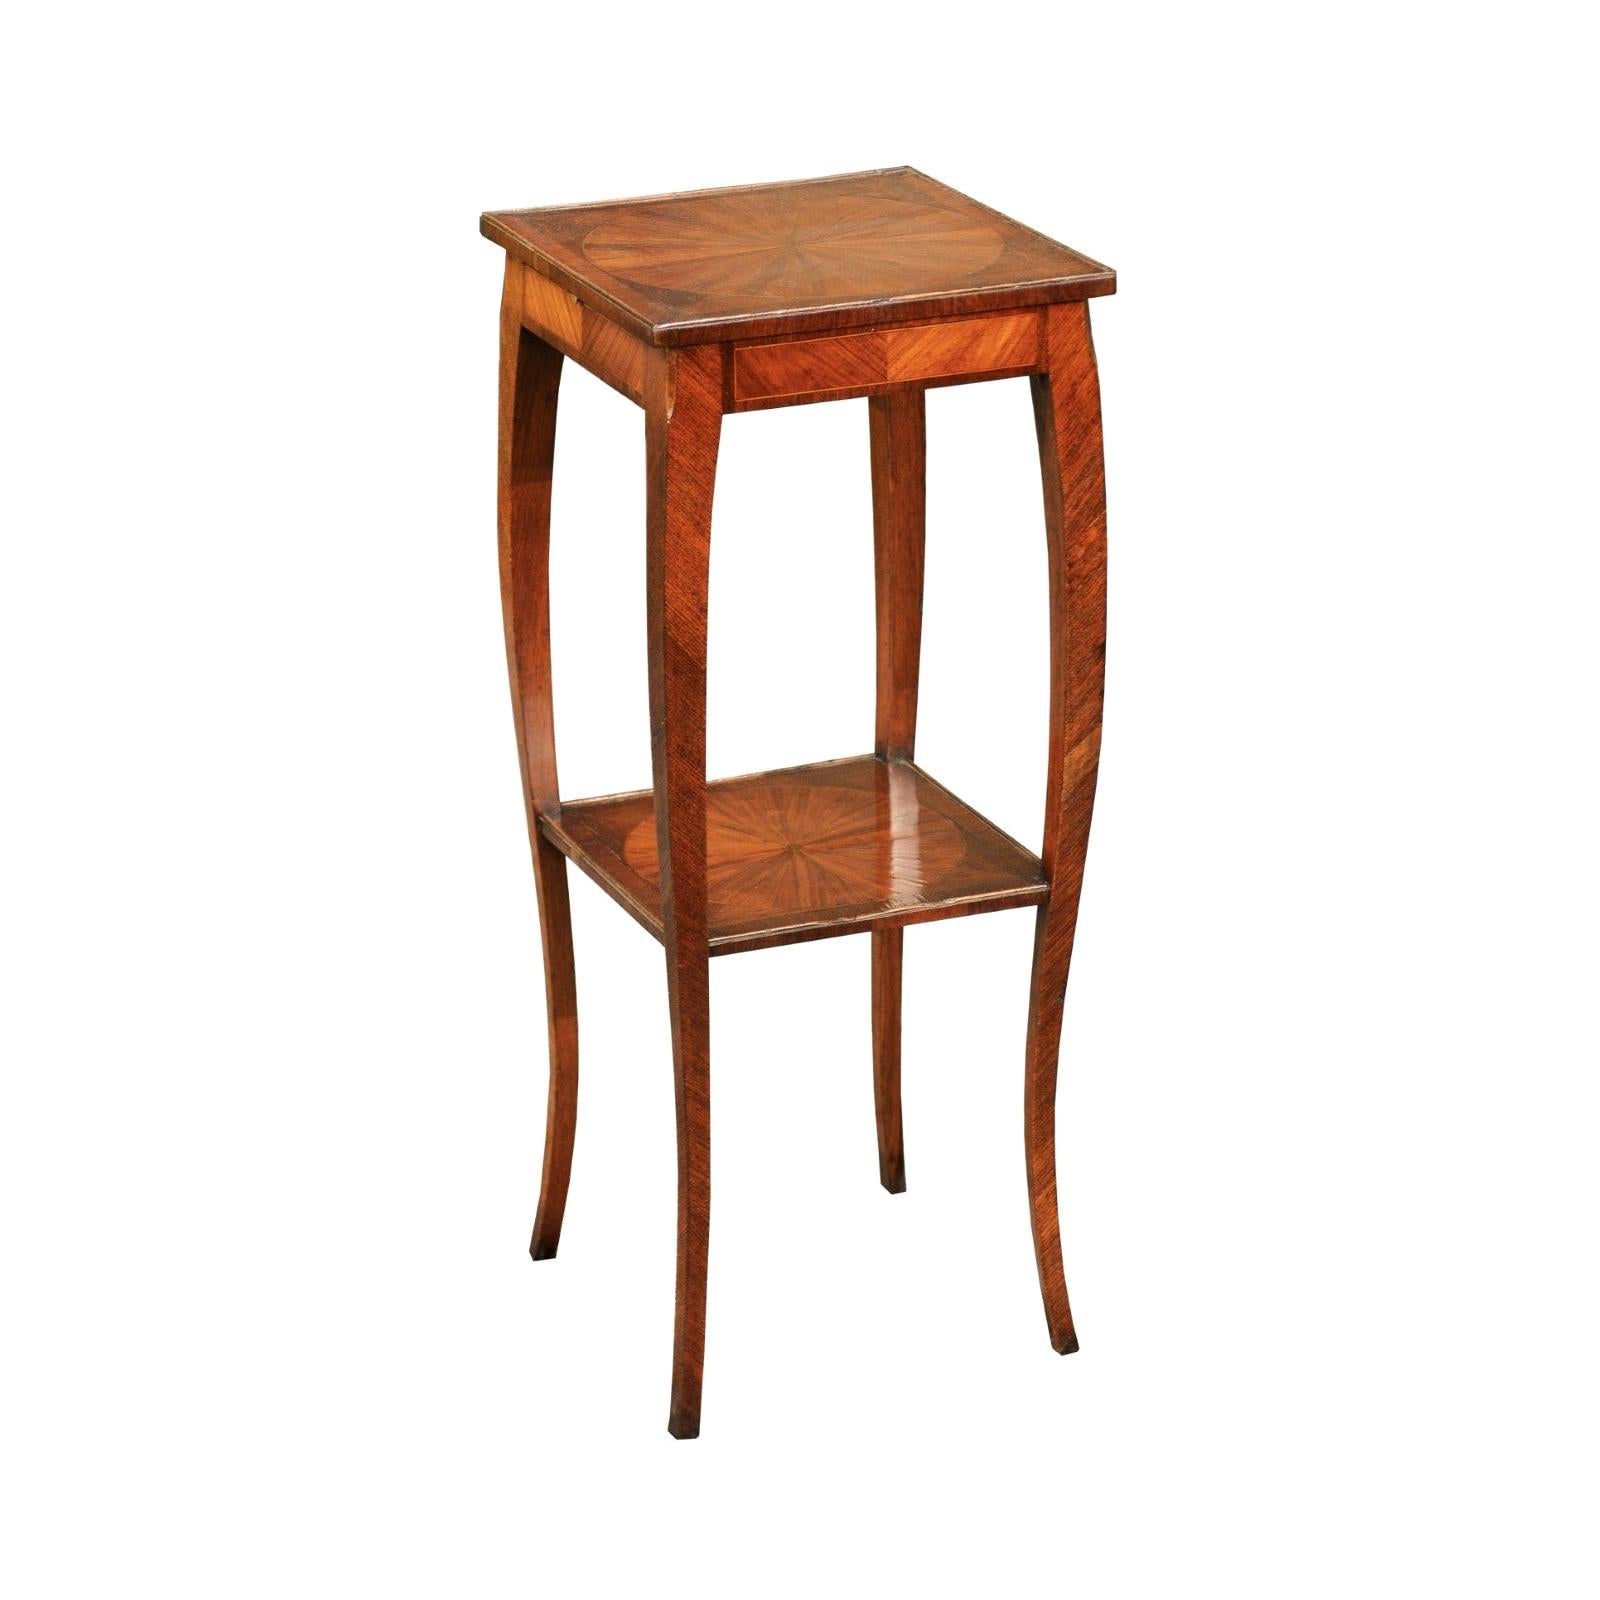 Italian 1820s Walnut Veneered Side Table with Inlay and Pull-Out Shelf